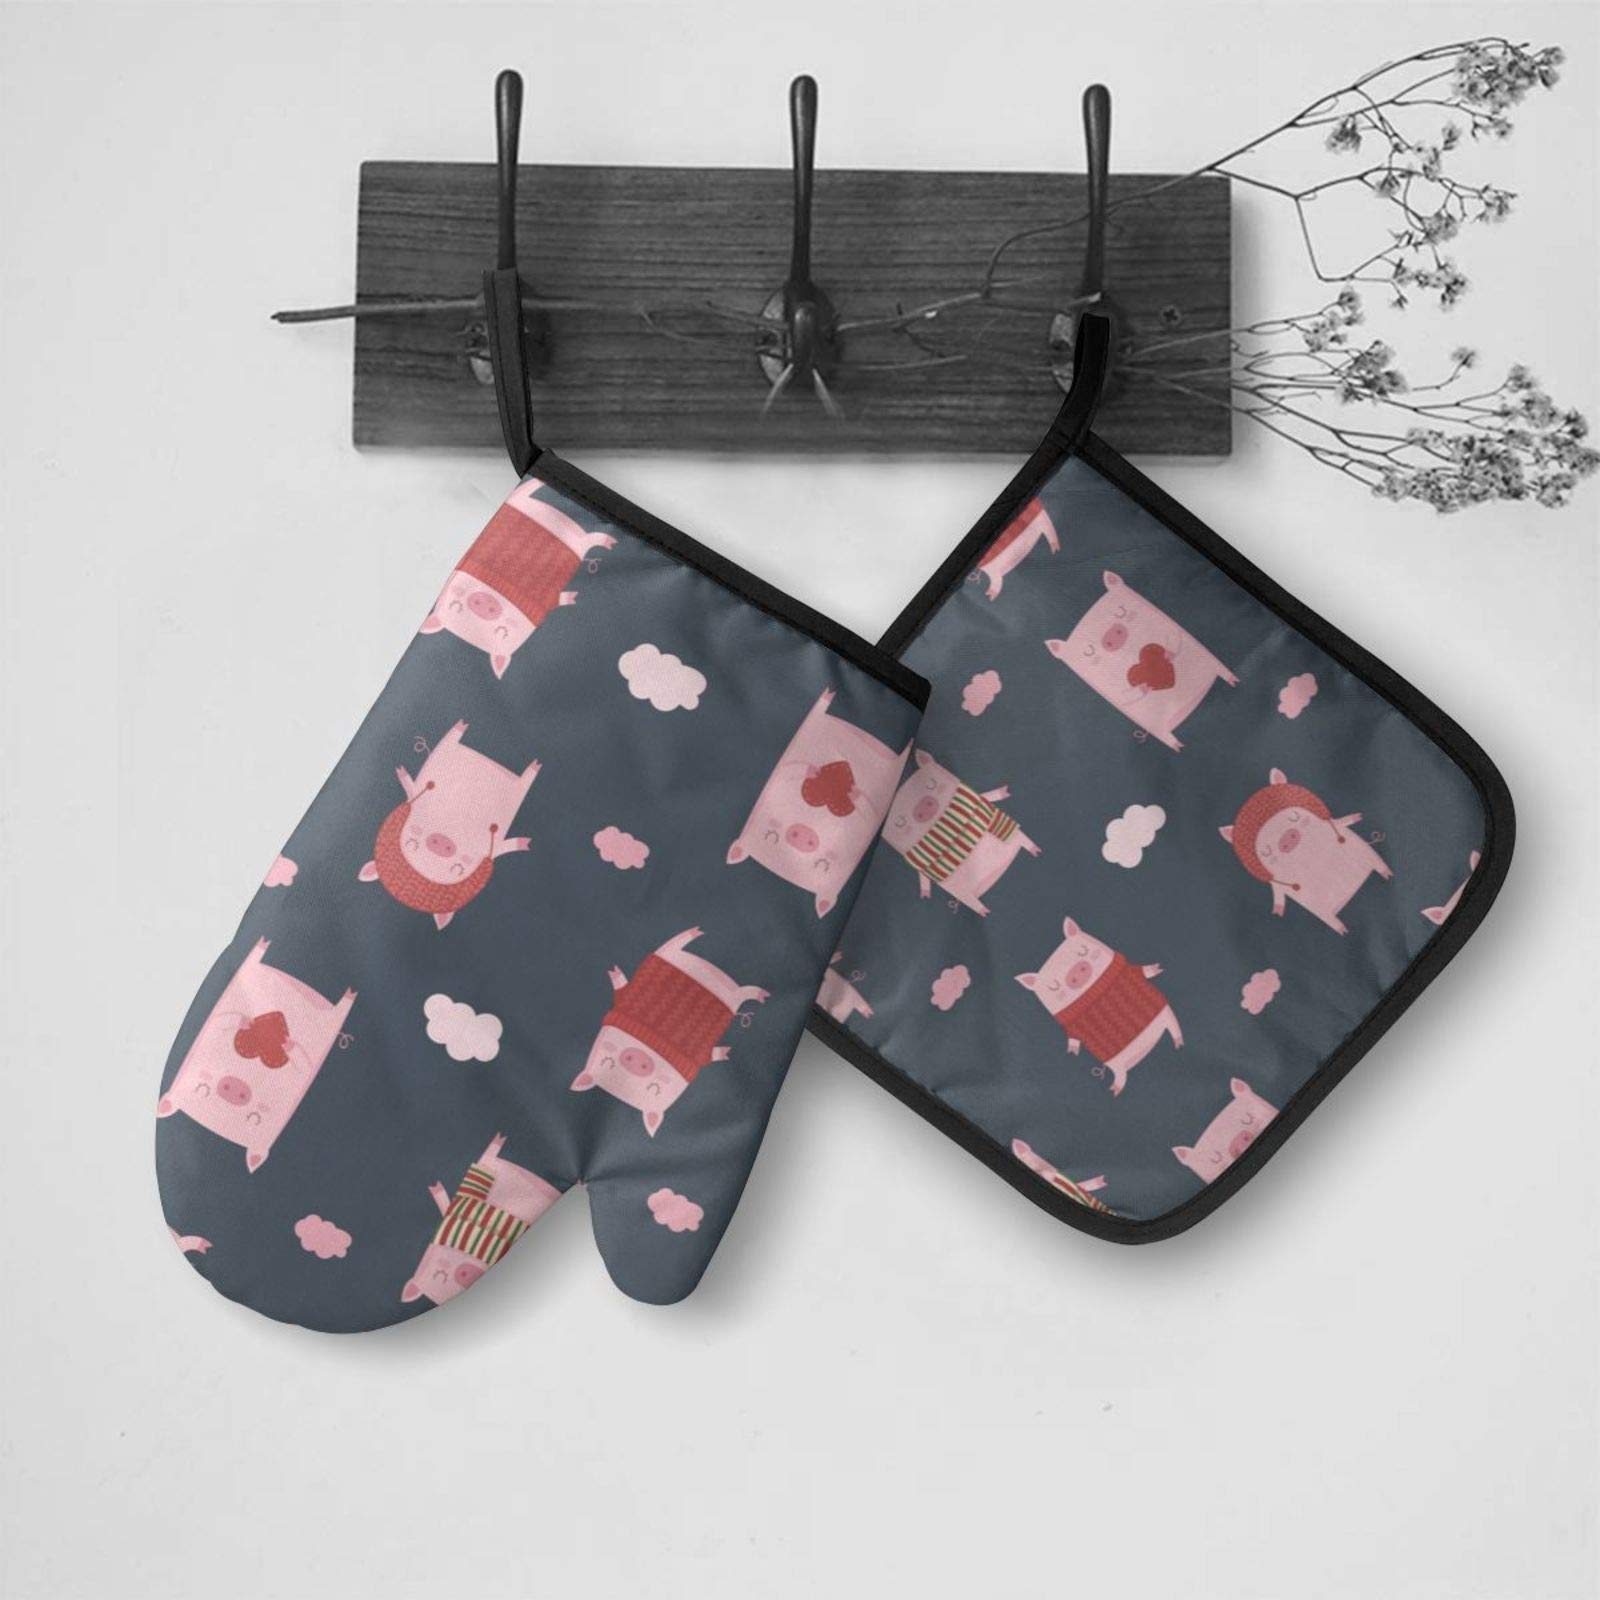 Cute Cartoon Pigs Oven Mitts and Pot Holders Sets Heat Resistant Oven Gloves with Non-Slip Surface for Reusable for Baking BBQ Cooking